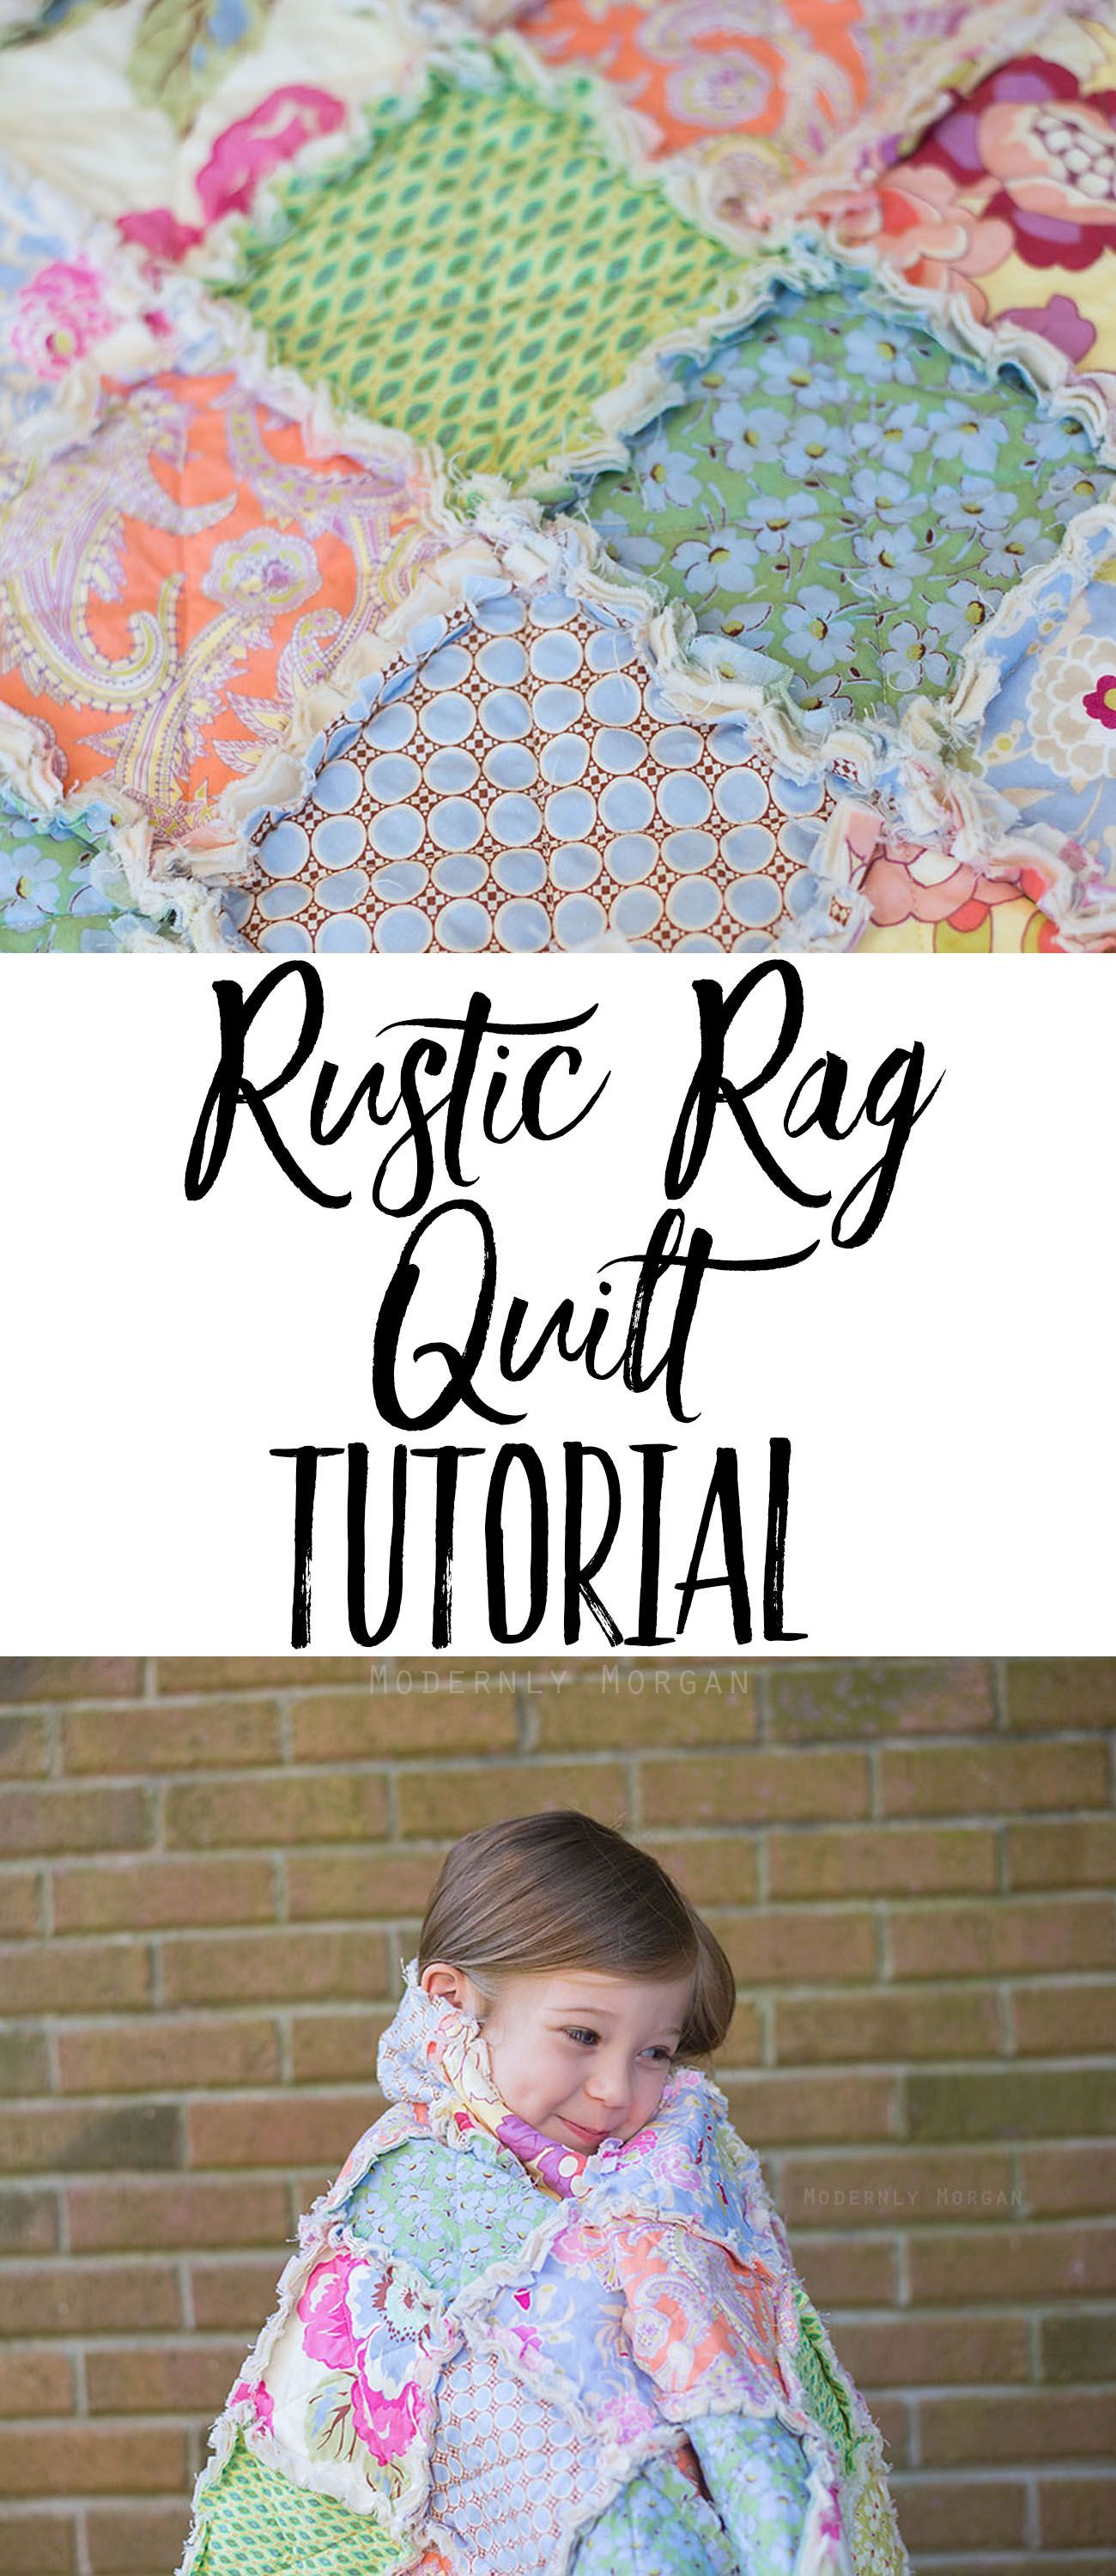 Rustic Rag Quilt Tutorial – a super easy and quick quilt (great for beginners) tha